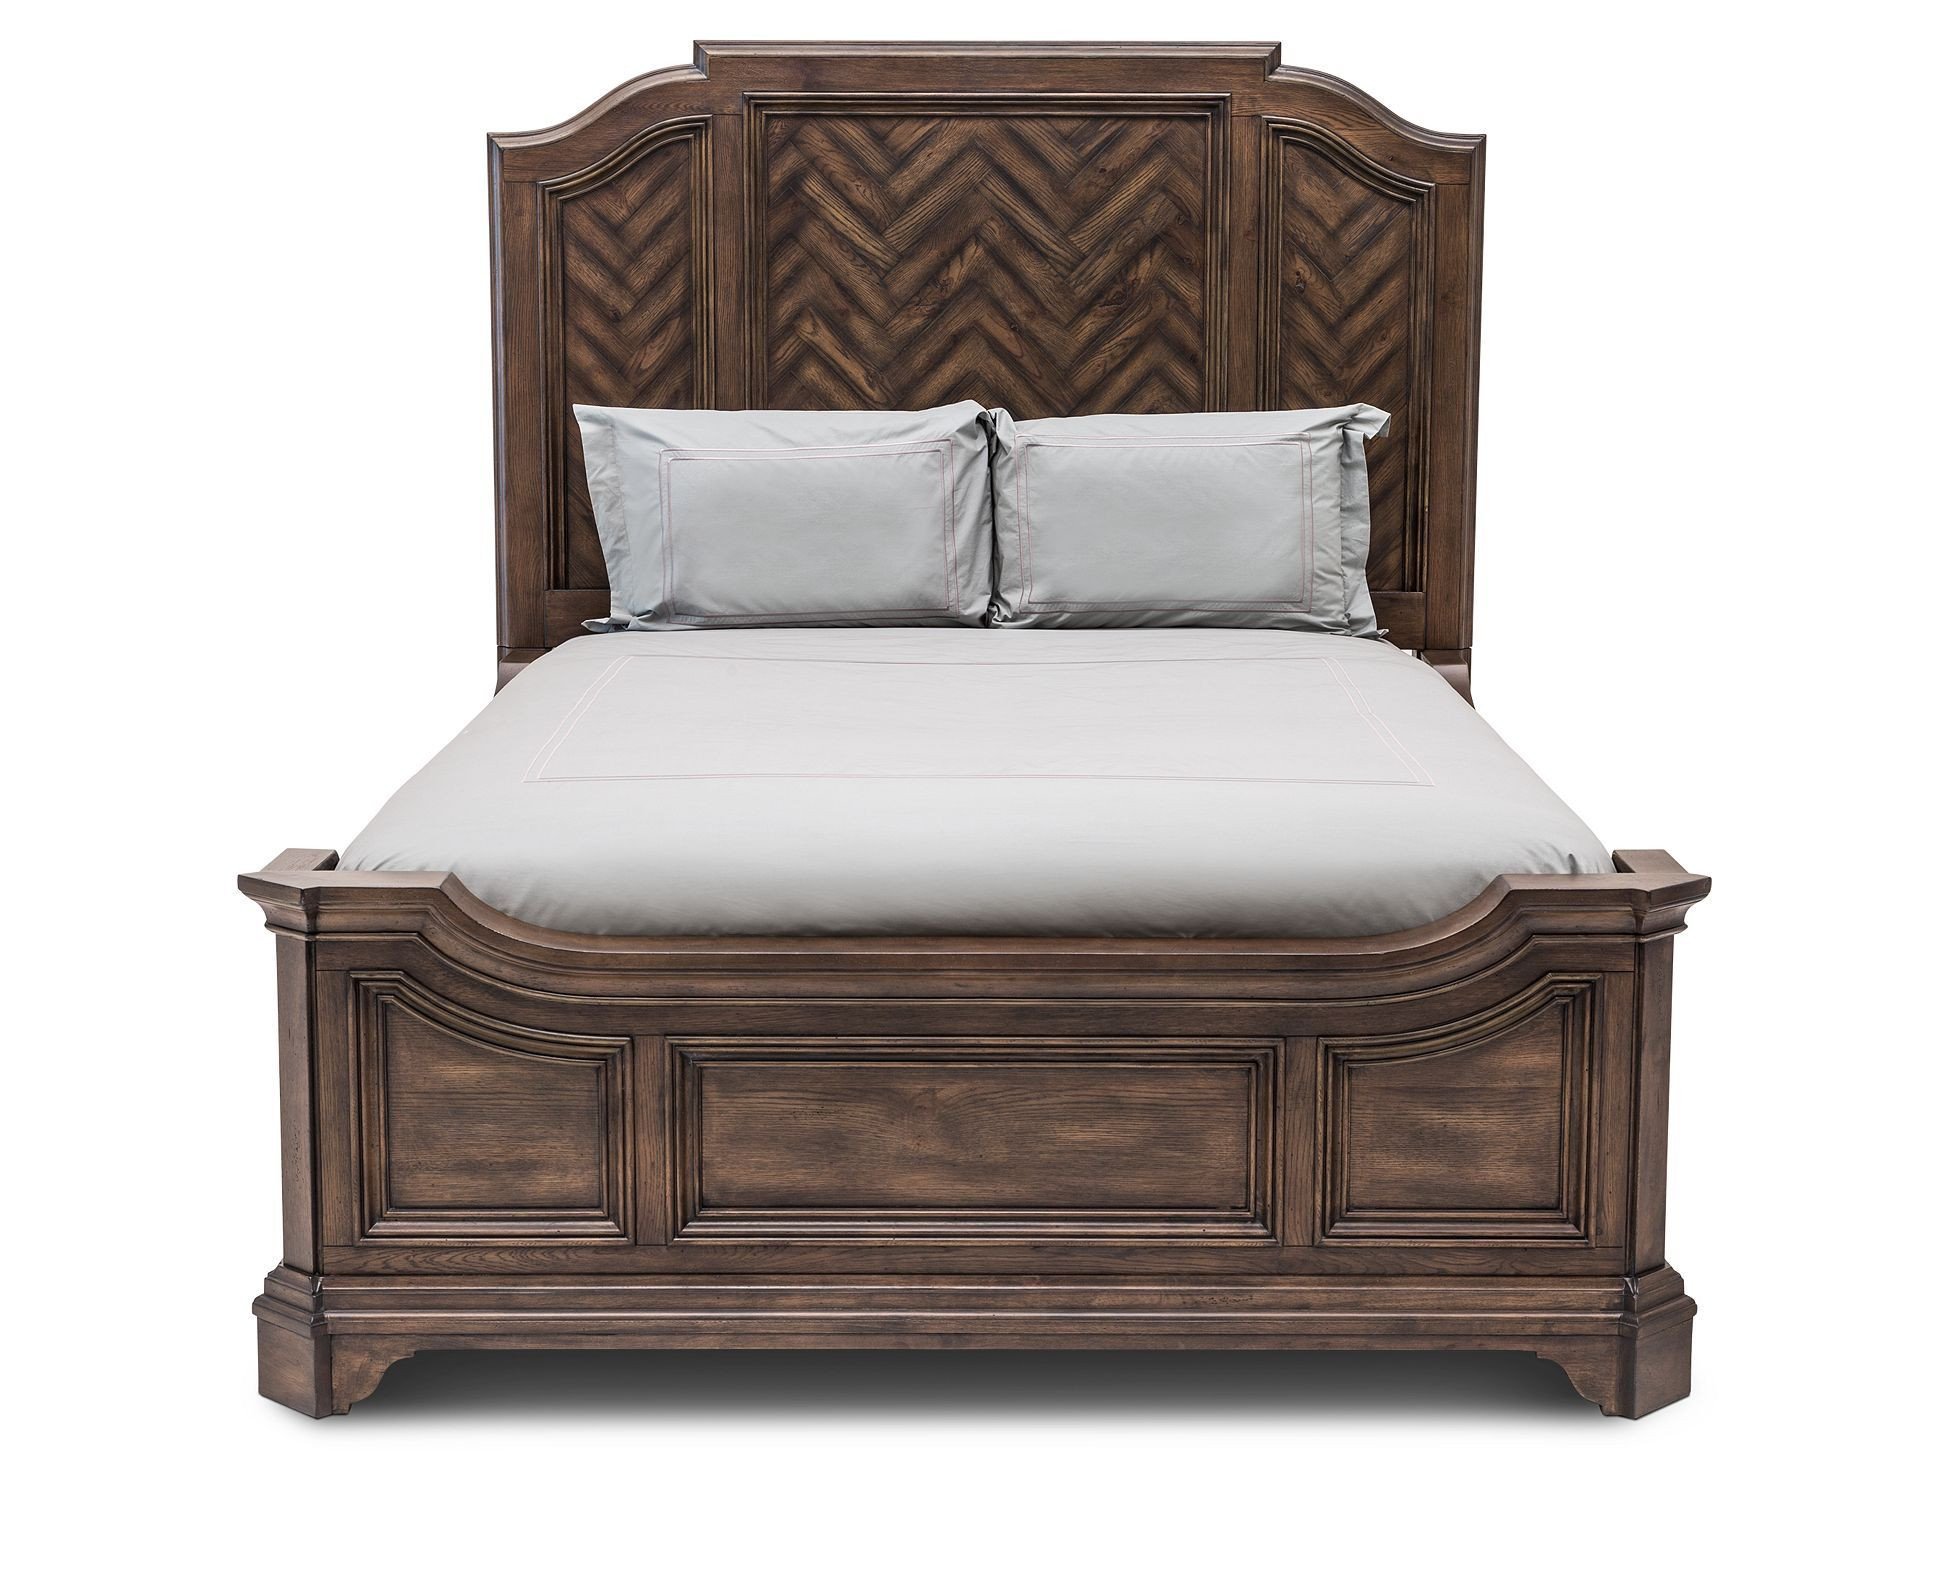 Bedroom Furniture Sale Clearance Inspirational theodore Panel Bed Bedroom In 2019